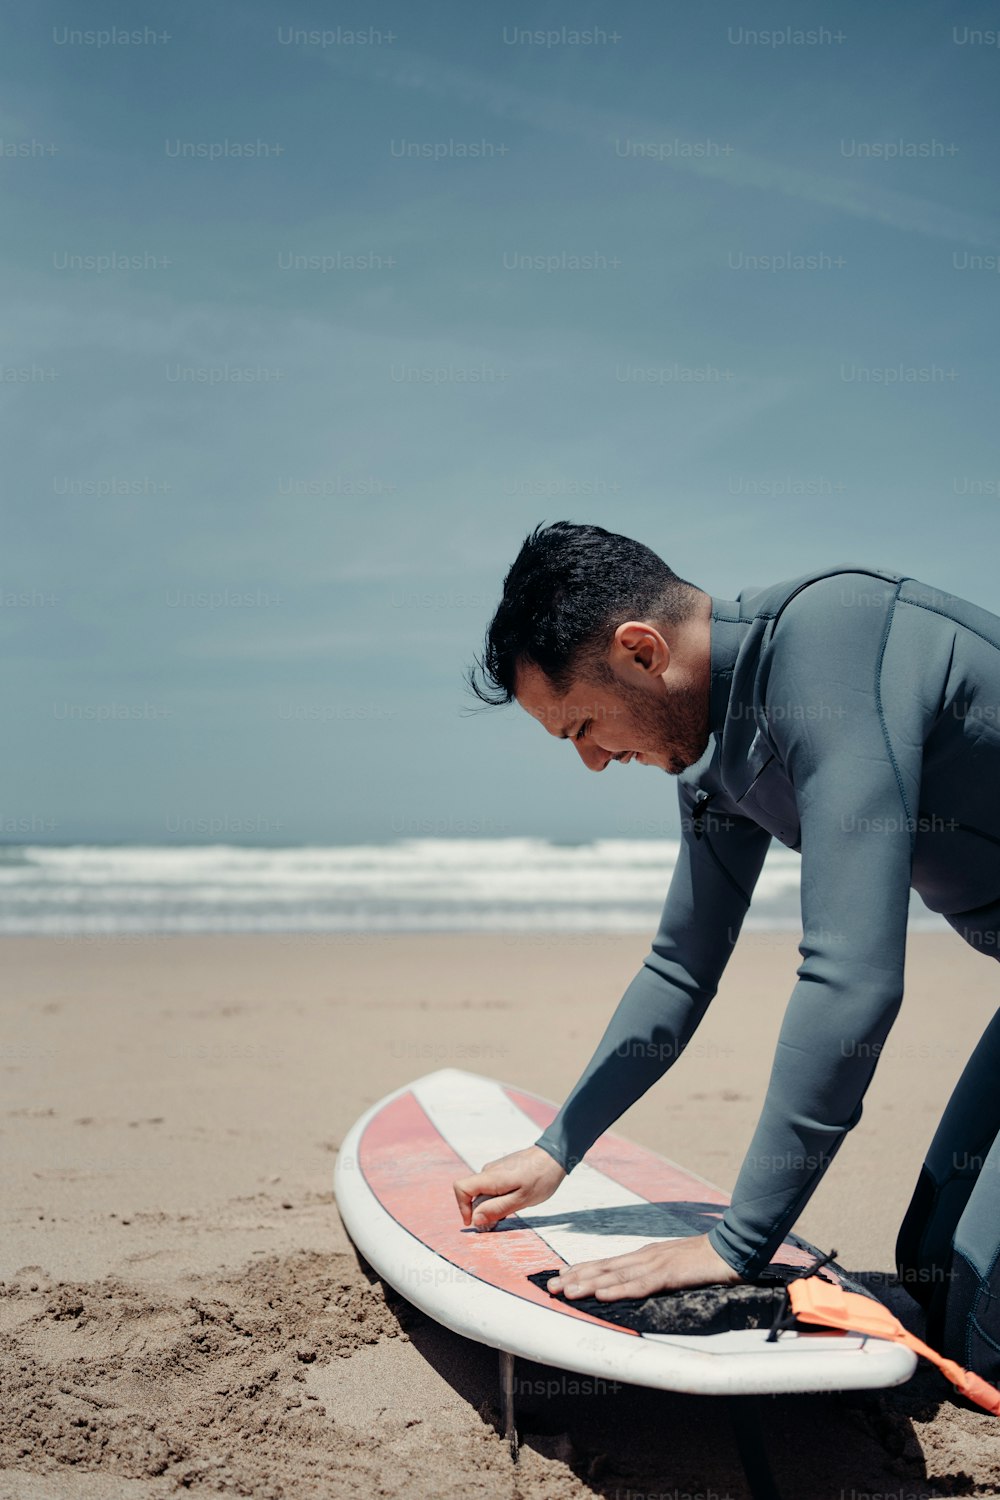 a man in a wet suit standing on a surfboard